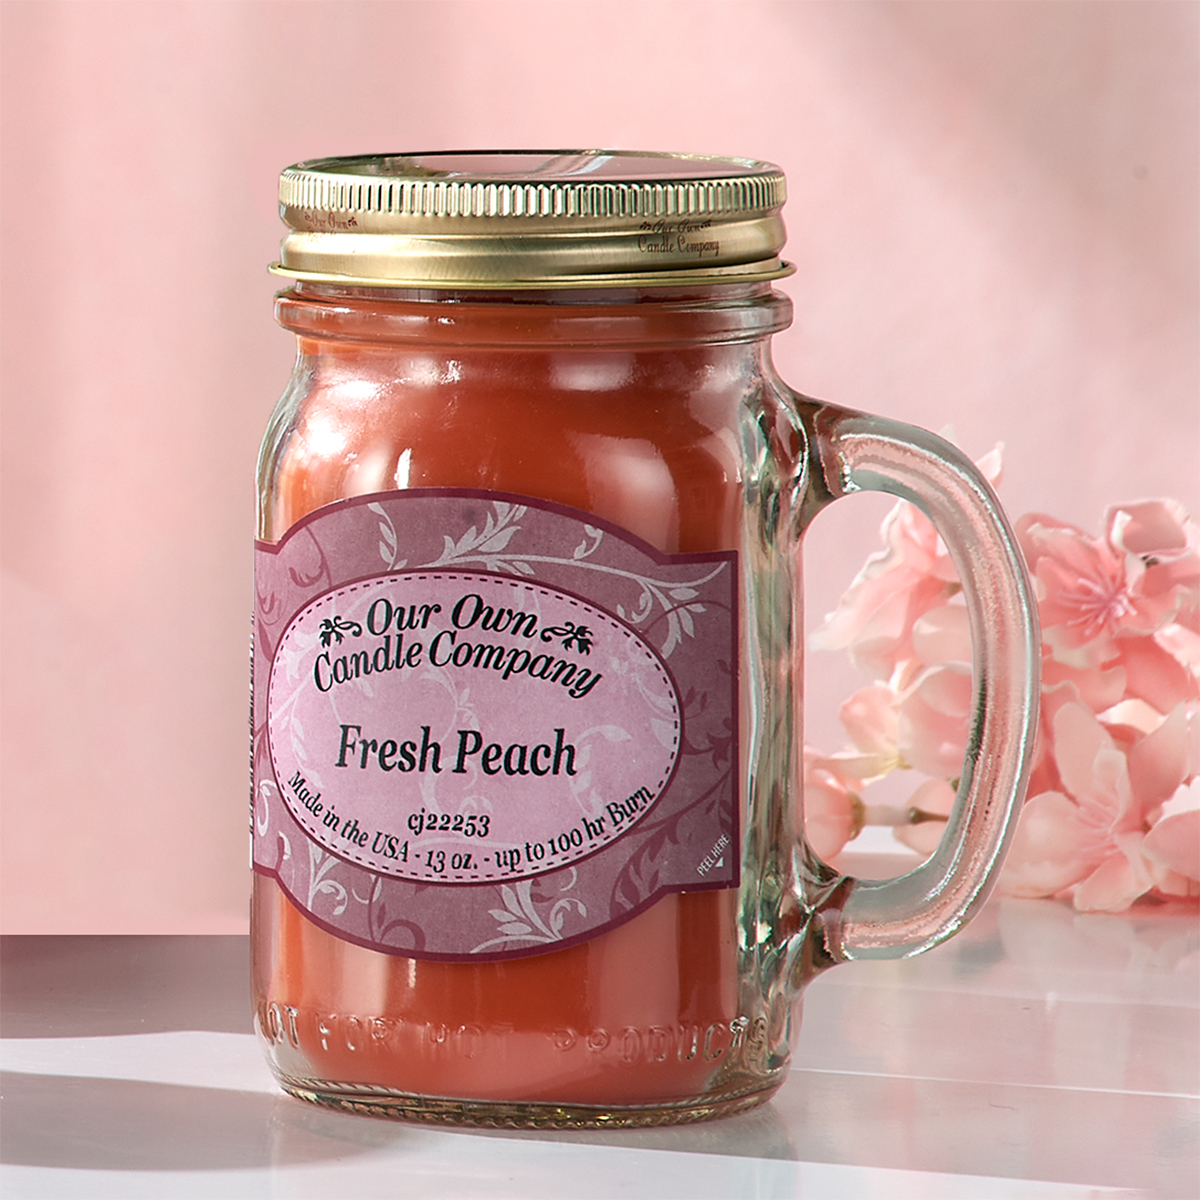 Our Own Candle Company Peach 13oz. Jar Candle